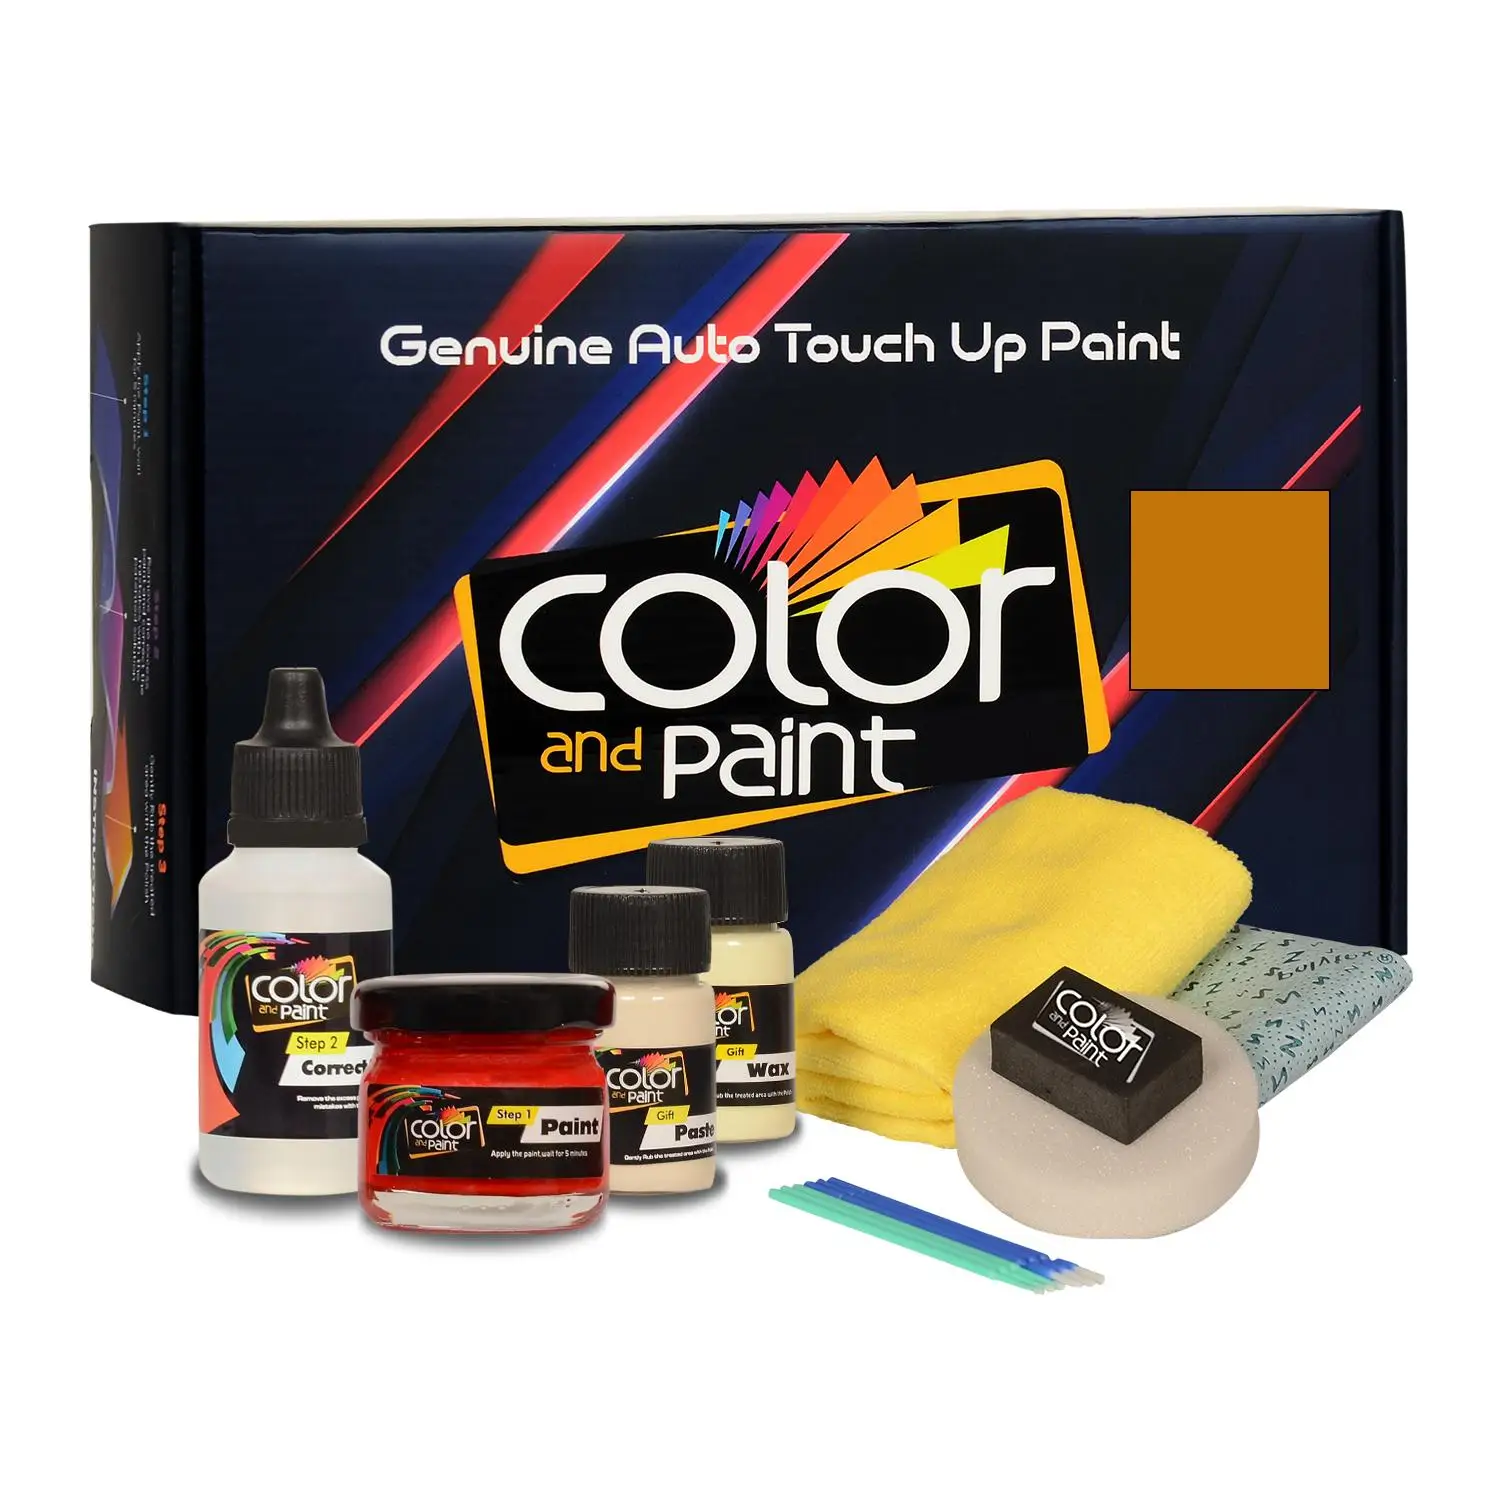 

Color and Paint compatible with Fiat Automotive Touch Up Paint - GIALLO BIRICHINO - 509/A - Basic Care